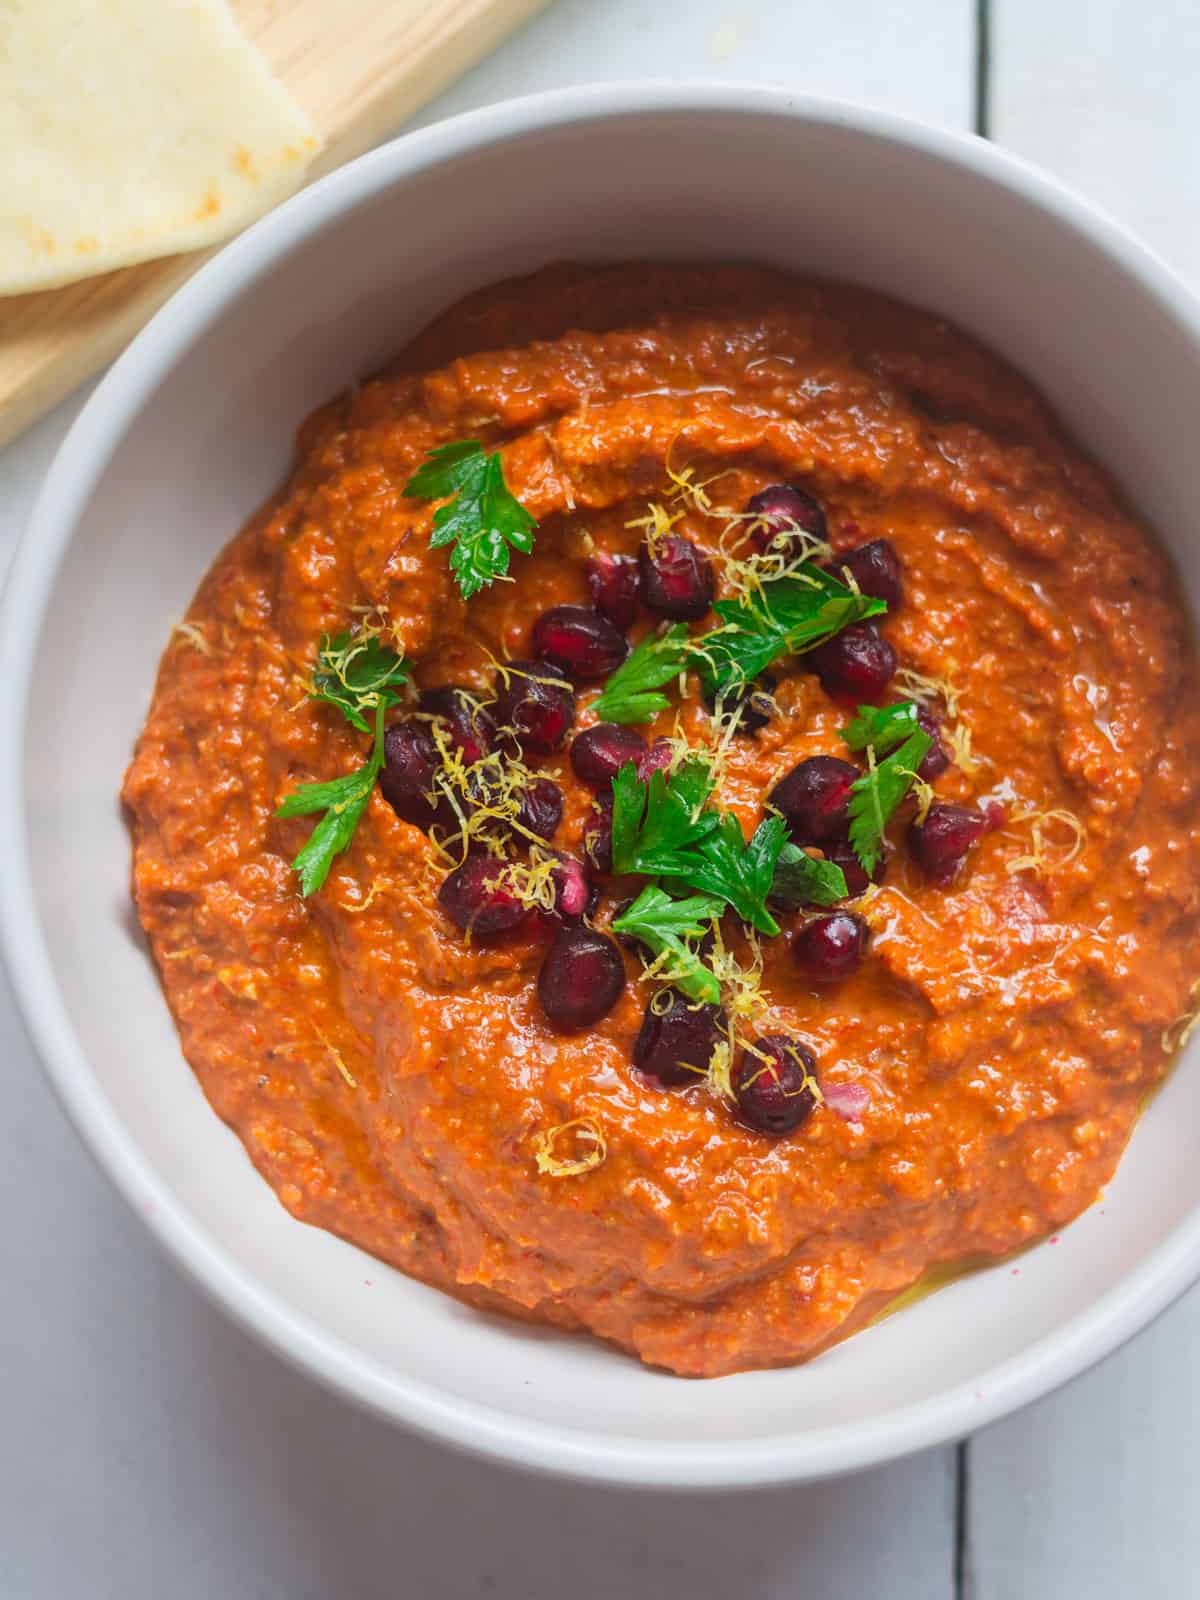 Muhammara recipe is a Turkish red pepper and walnut dip with warm spices and pomegranate molasses.